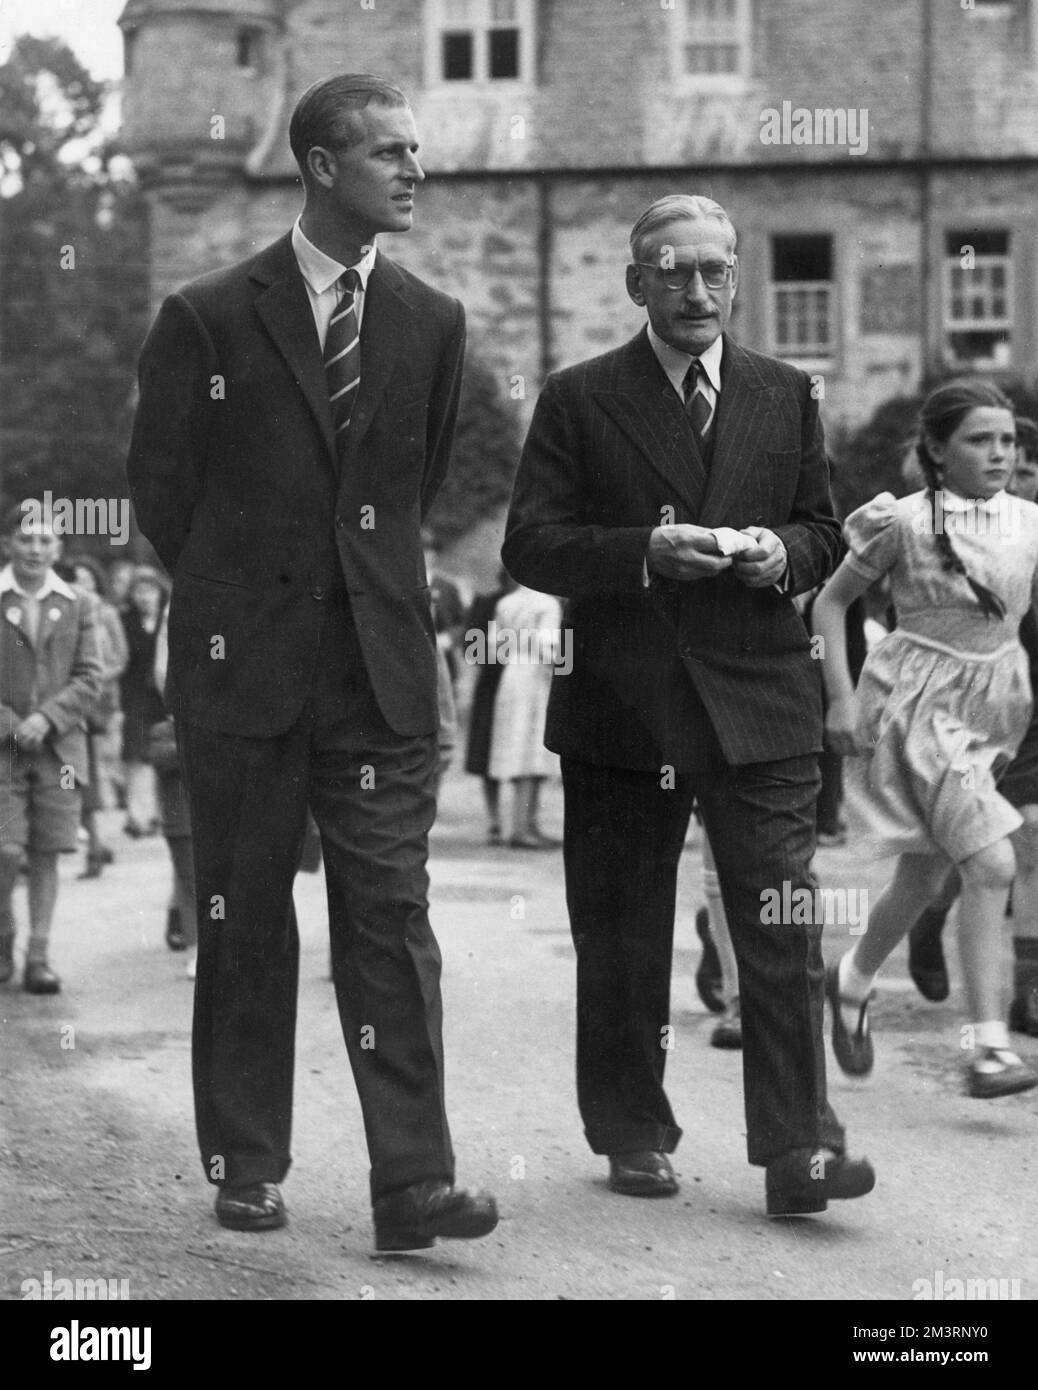 Prince Philip, Duke of Edinburgh visiting a fete at his old school, Gordonstoun in 1949, his first official visit.  Pictured wearing the old school tie of purple and white and walking with Colonel Shaw-Zambra.     Date: 1949 Stock Photo